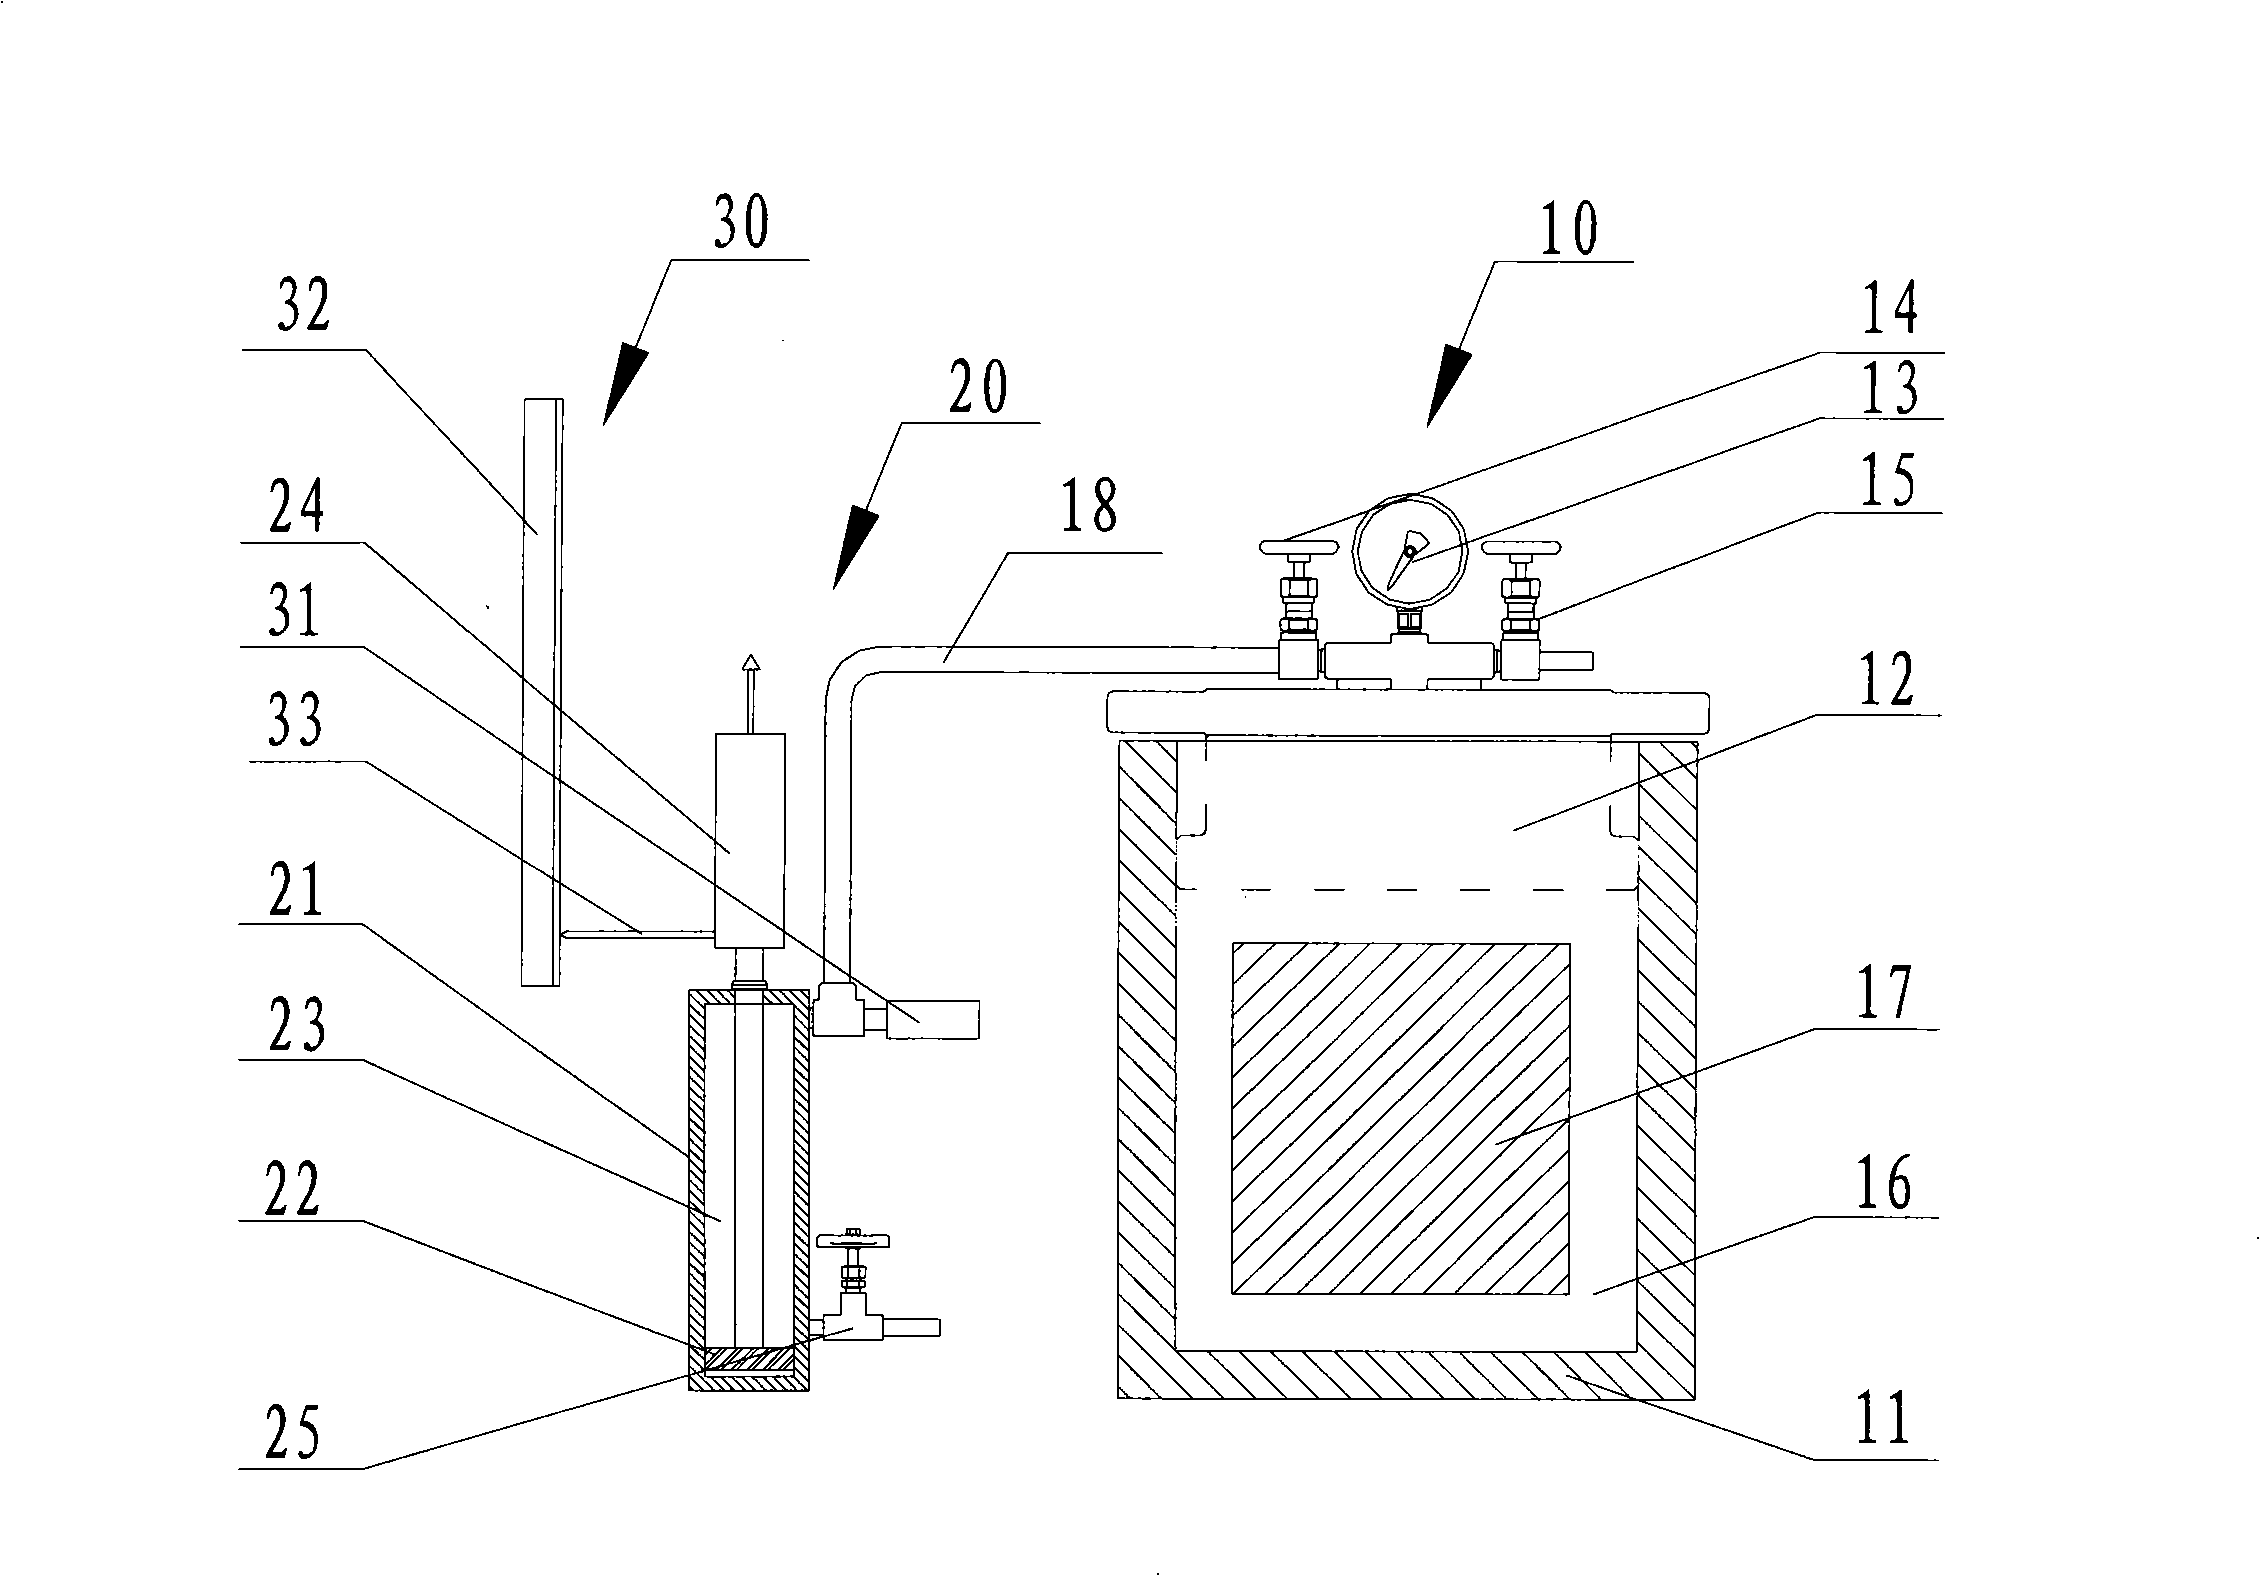 Measuring apparatus and test method for volume elastic modulus of solid buoyancy material